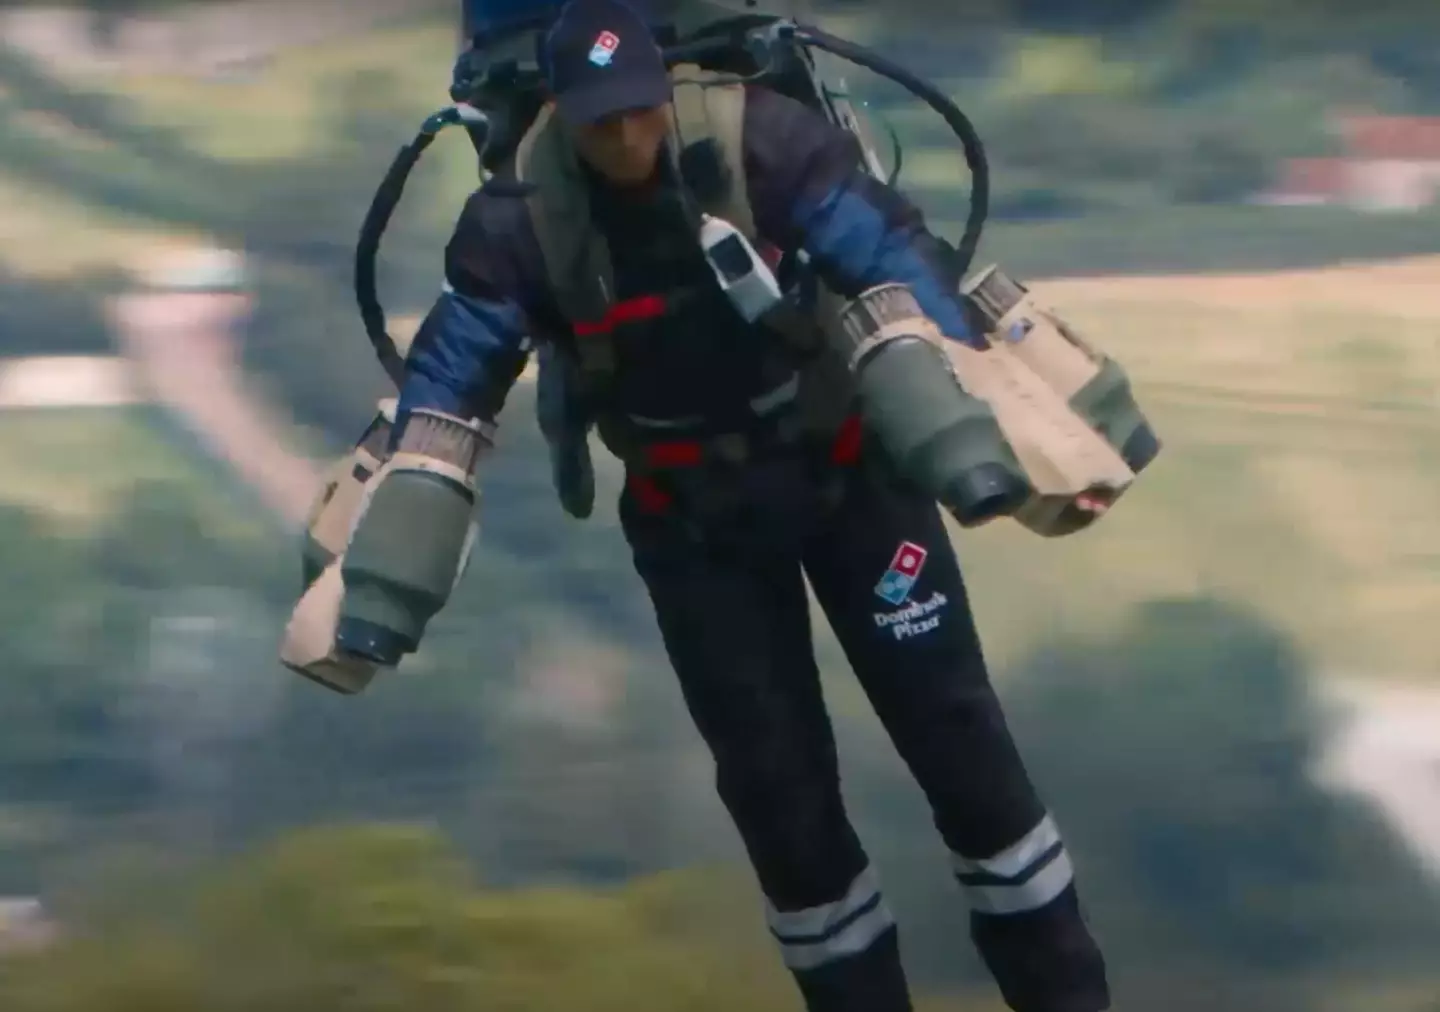 The jet pack delivery service is a world first.